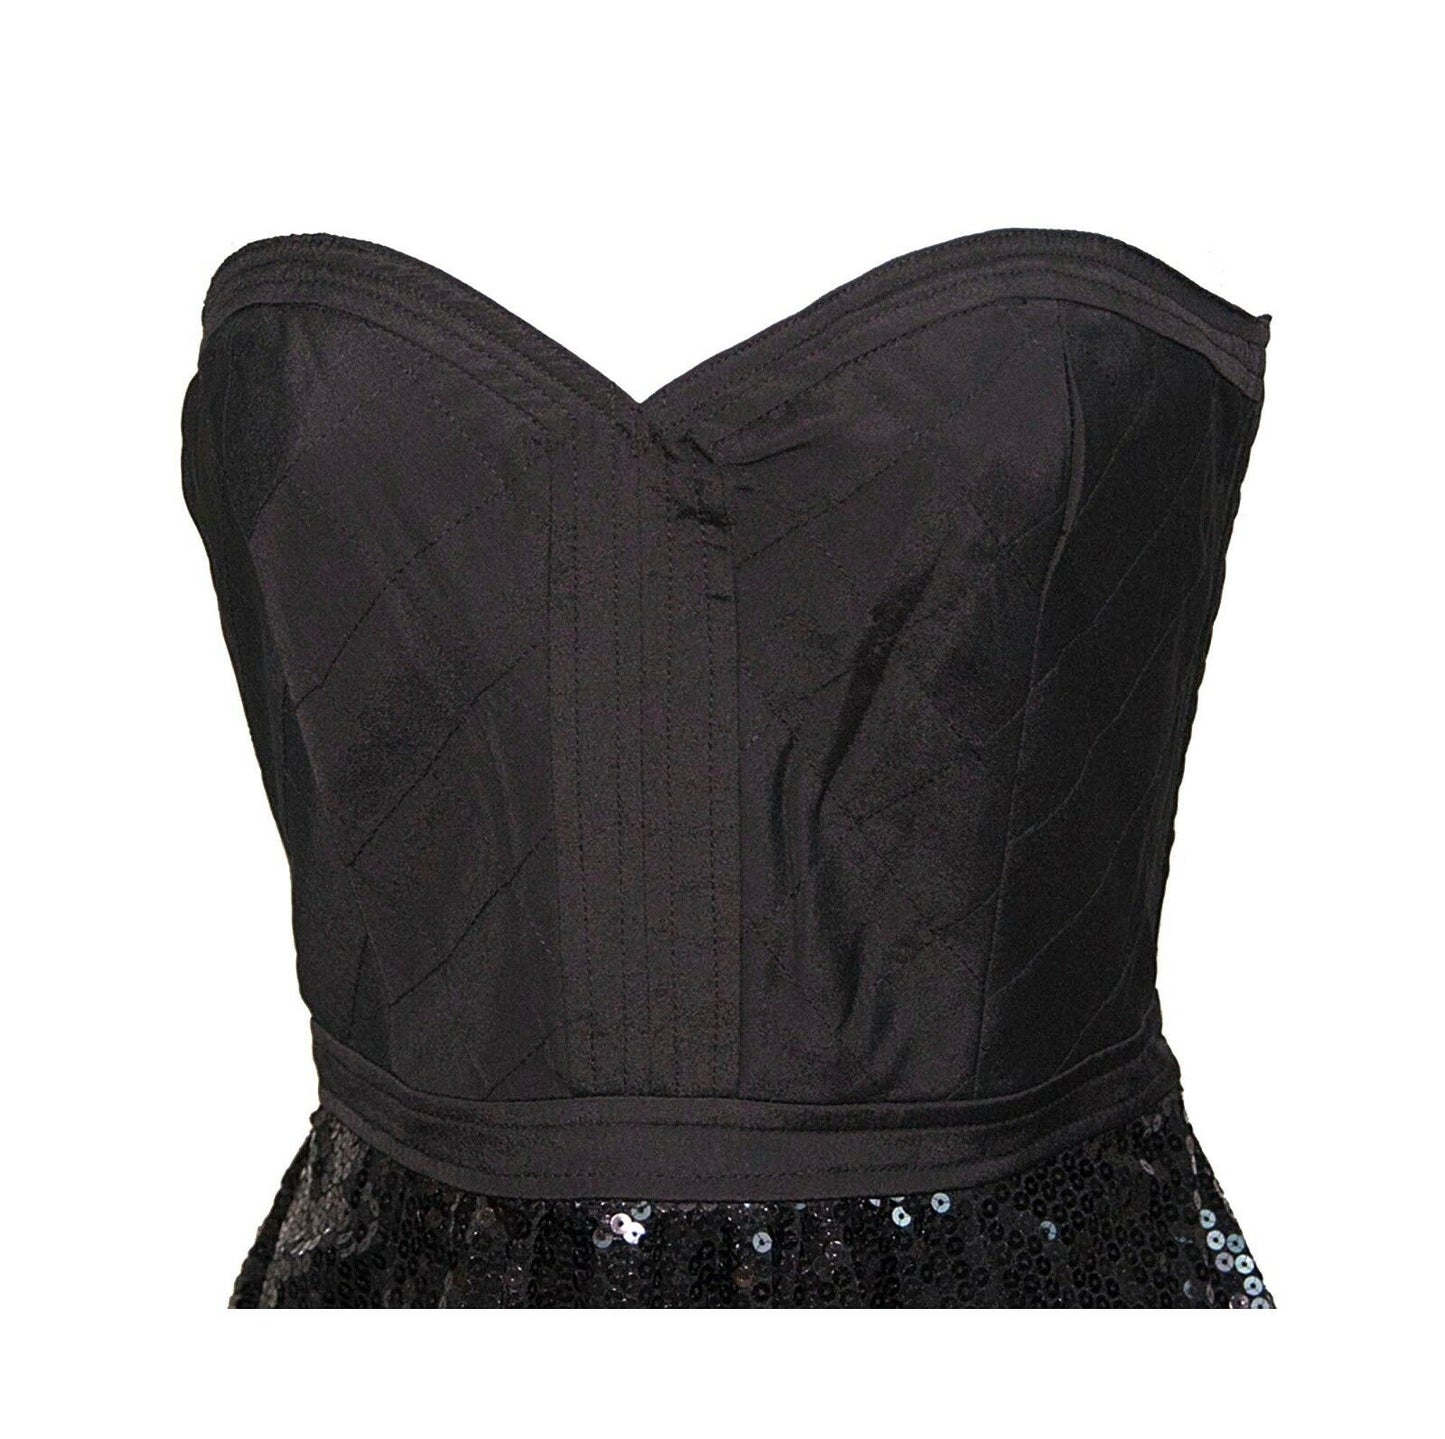 Pure Sugar Black Corset Sequin Skirt Cocktail Prom Party Bustier Dress S NWT